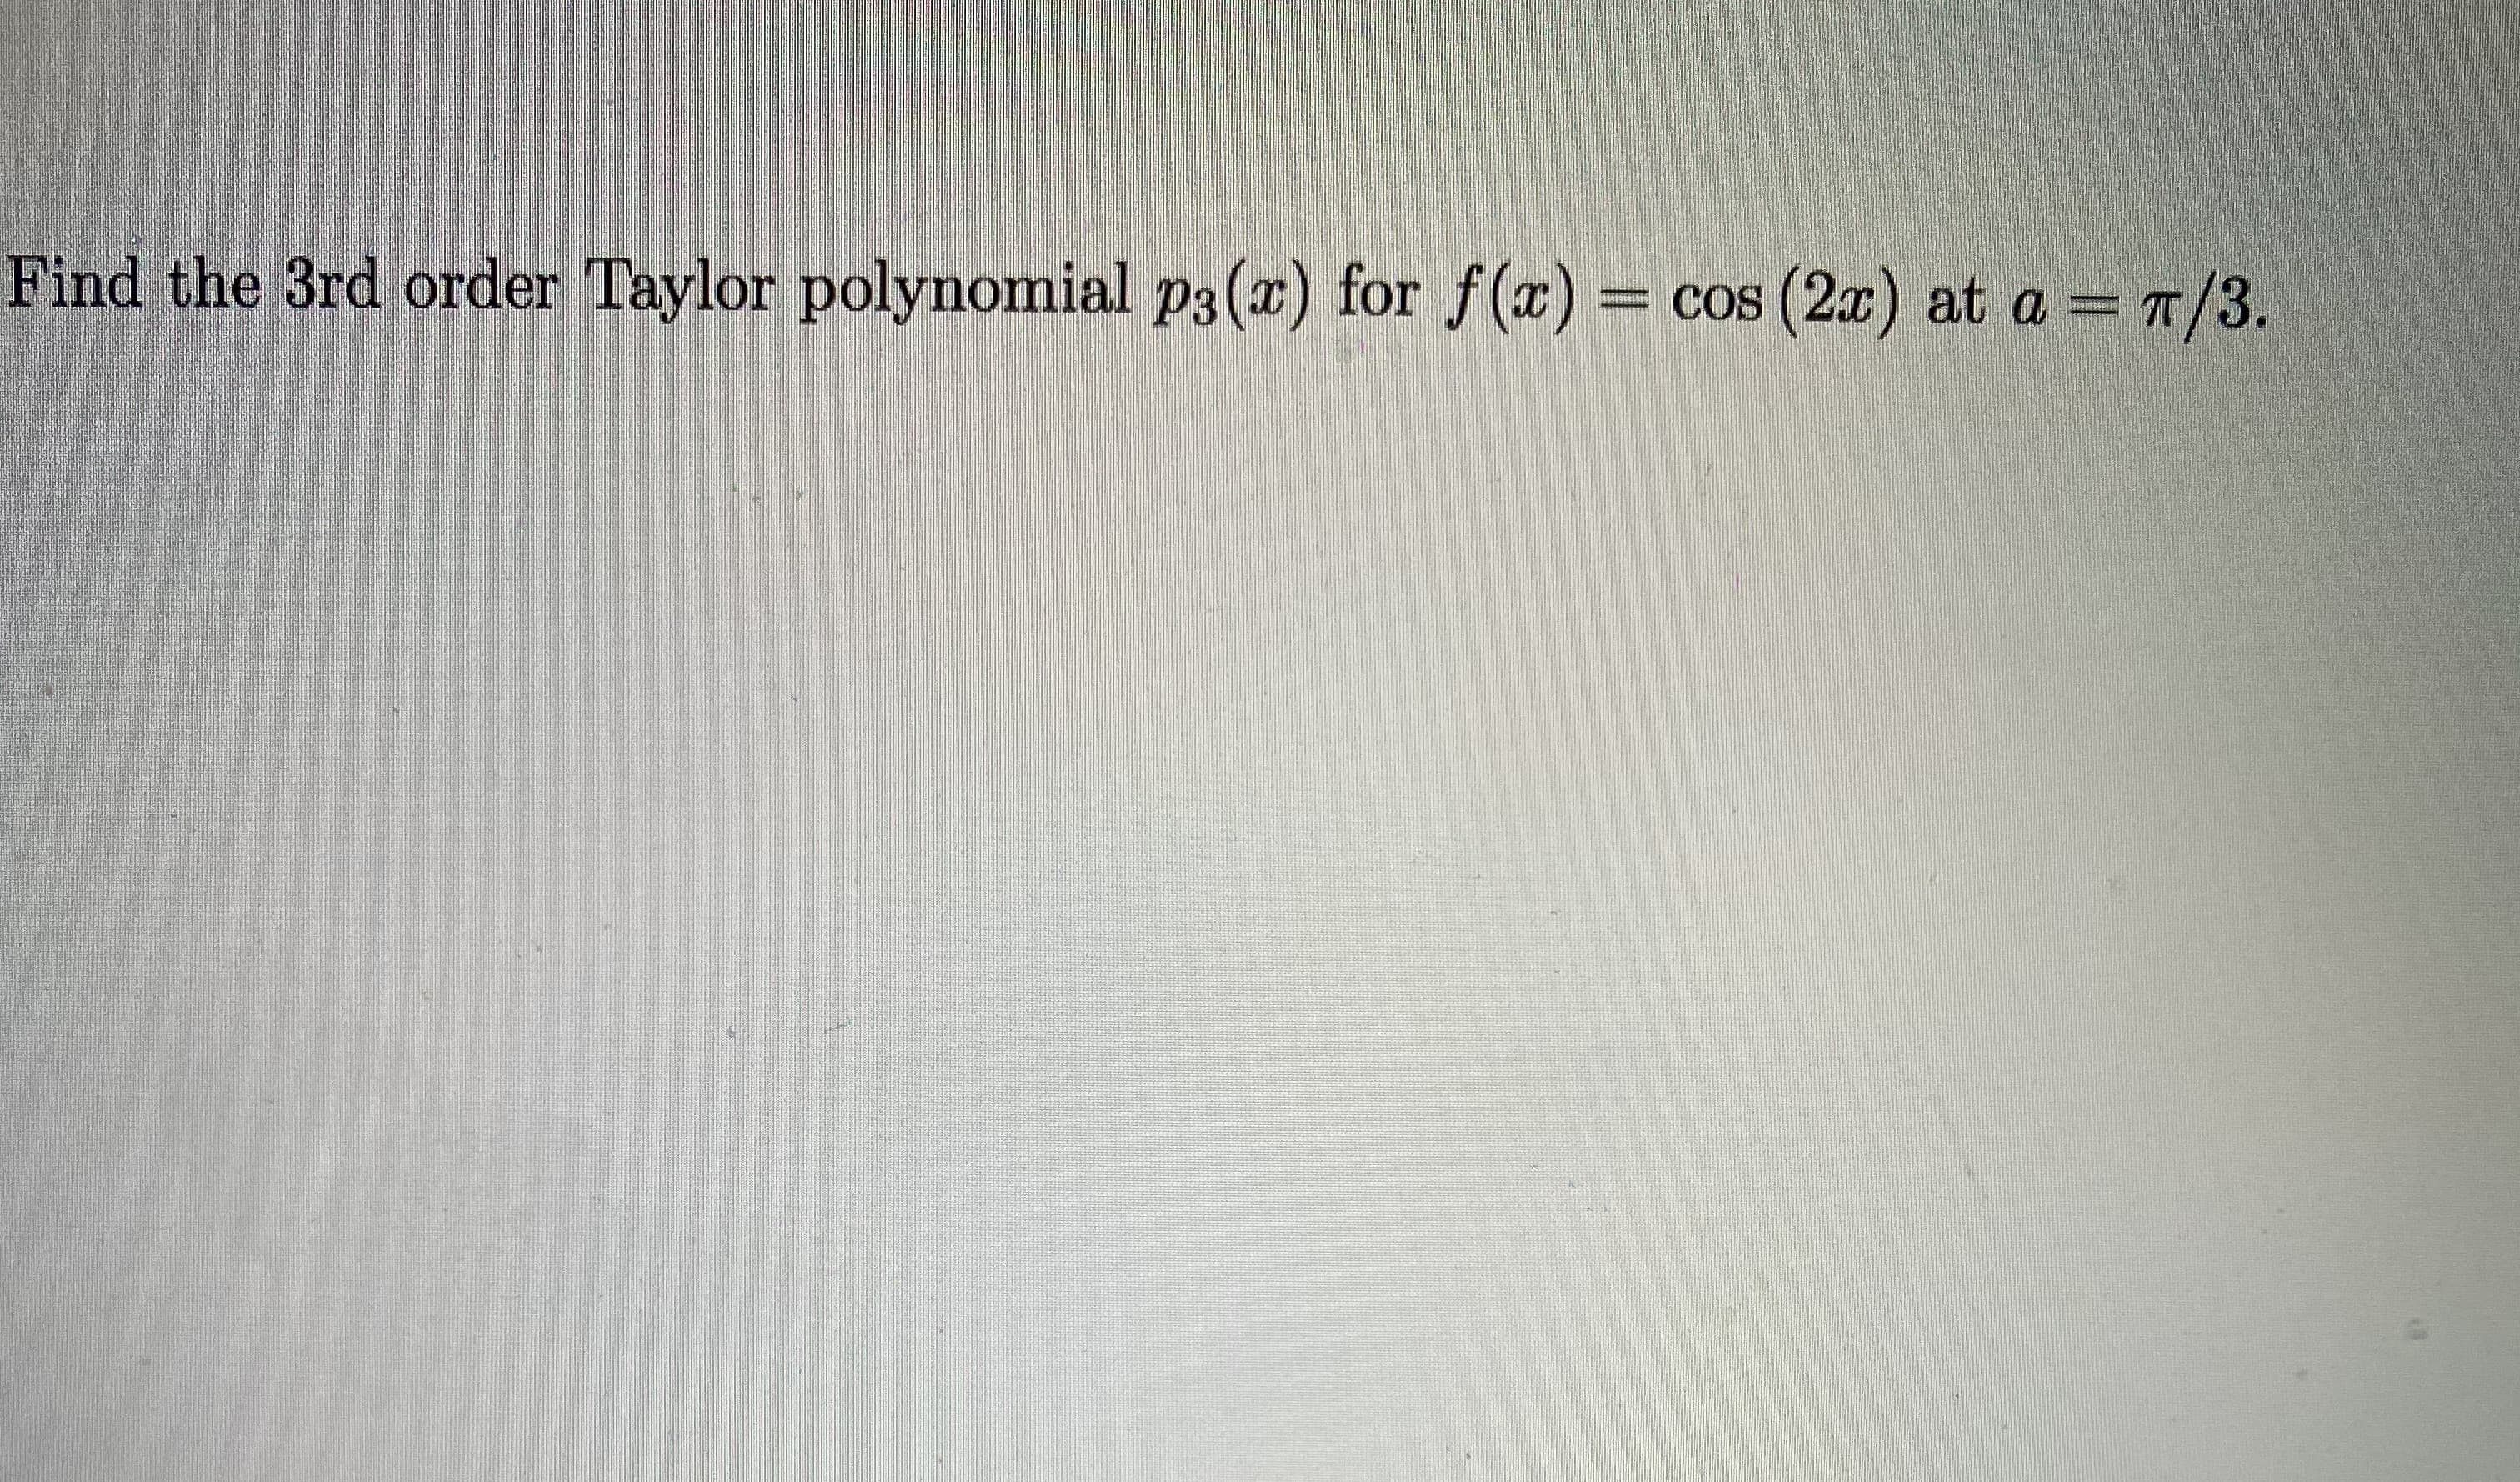 e 3rd order Taylor polynomial p3(x) for f(x)
cos (2x) at a = T/3.
%3D
